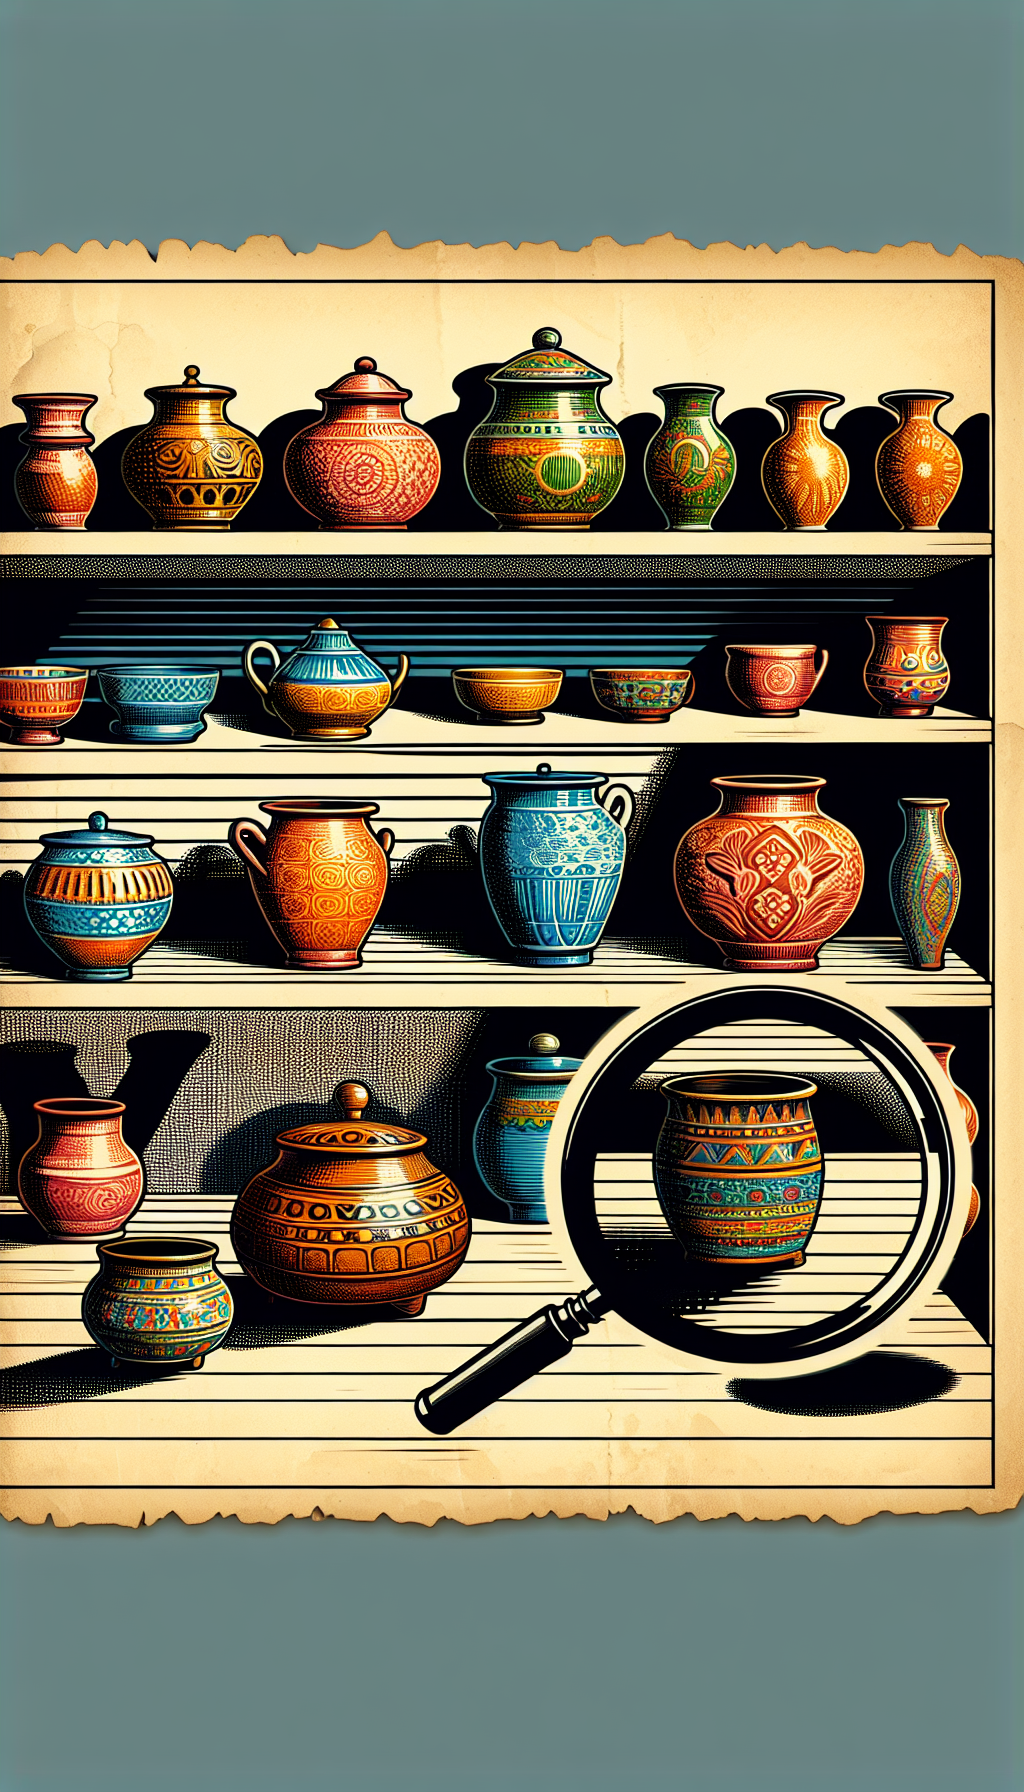 An illustration depicts a shelf of diverse, colorful crocks with intricate glazes and patterns, each casting a shadow that morphs into its estimated value in vintage typography. A magnifying glass hovers over, highlighting the unique features and styles of one standout crock, symbolizing the collector's discerning eye for the aesthetic allure and antique value of collectible crocks.